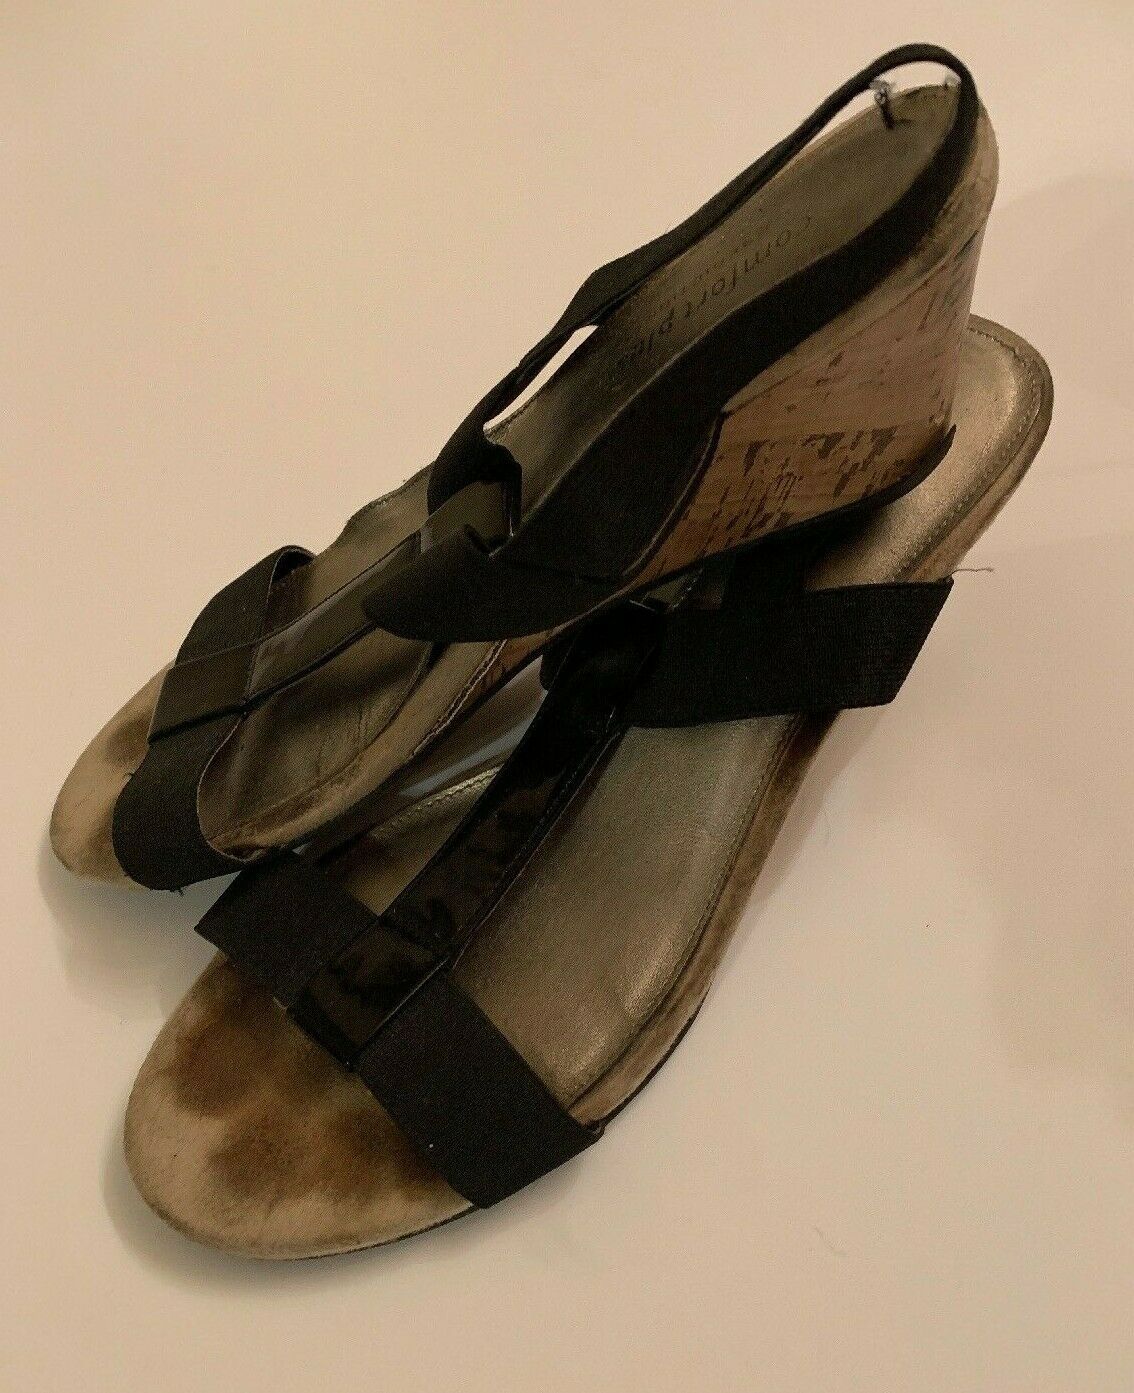 Used, Well Worn Womens Shoes Black Sandals size 9